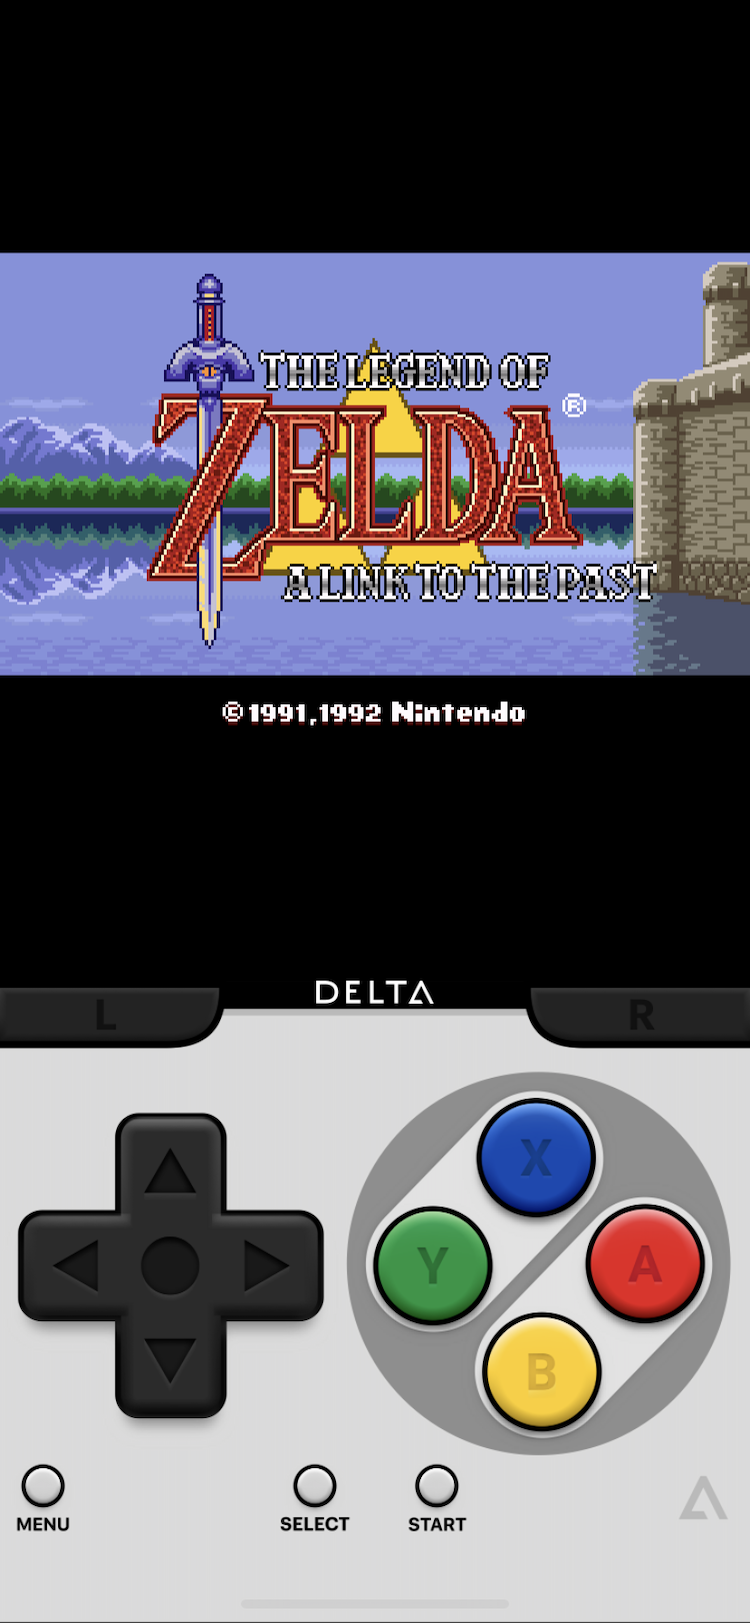 How to Get Delta Emulator iPhone/iOS 17 - GBA, SNES, N64 2023 